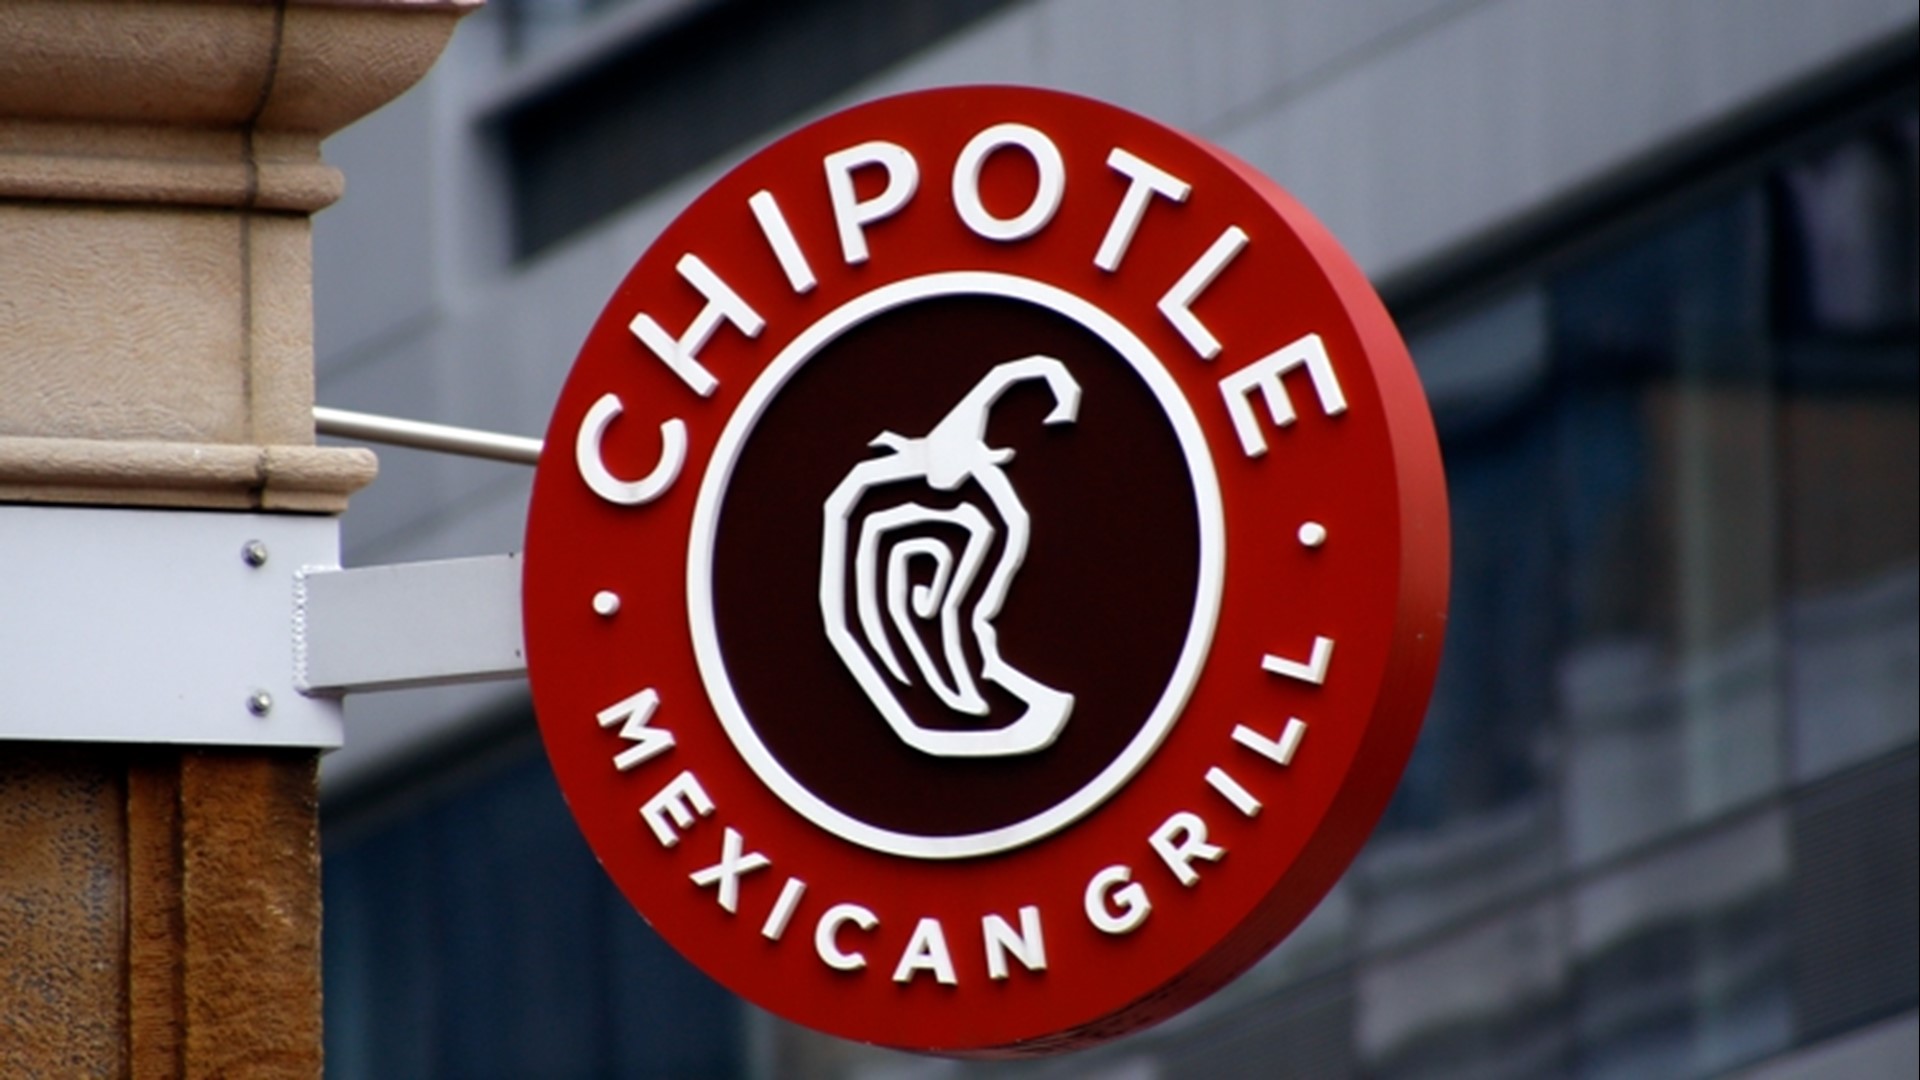 Chipotle Mexican Grill has agreed to pay DC nearly $323,000 to settle child labor allegations.